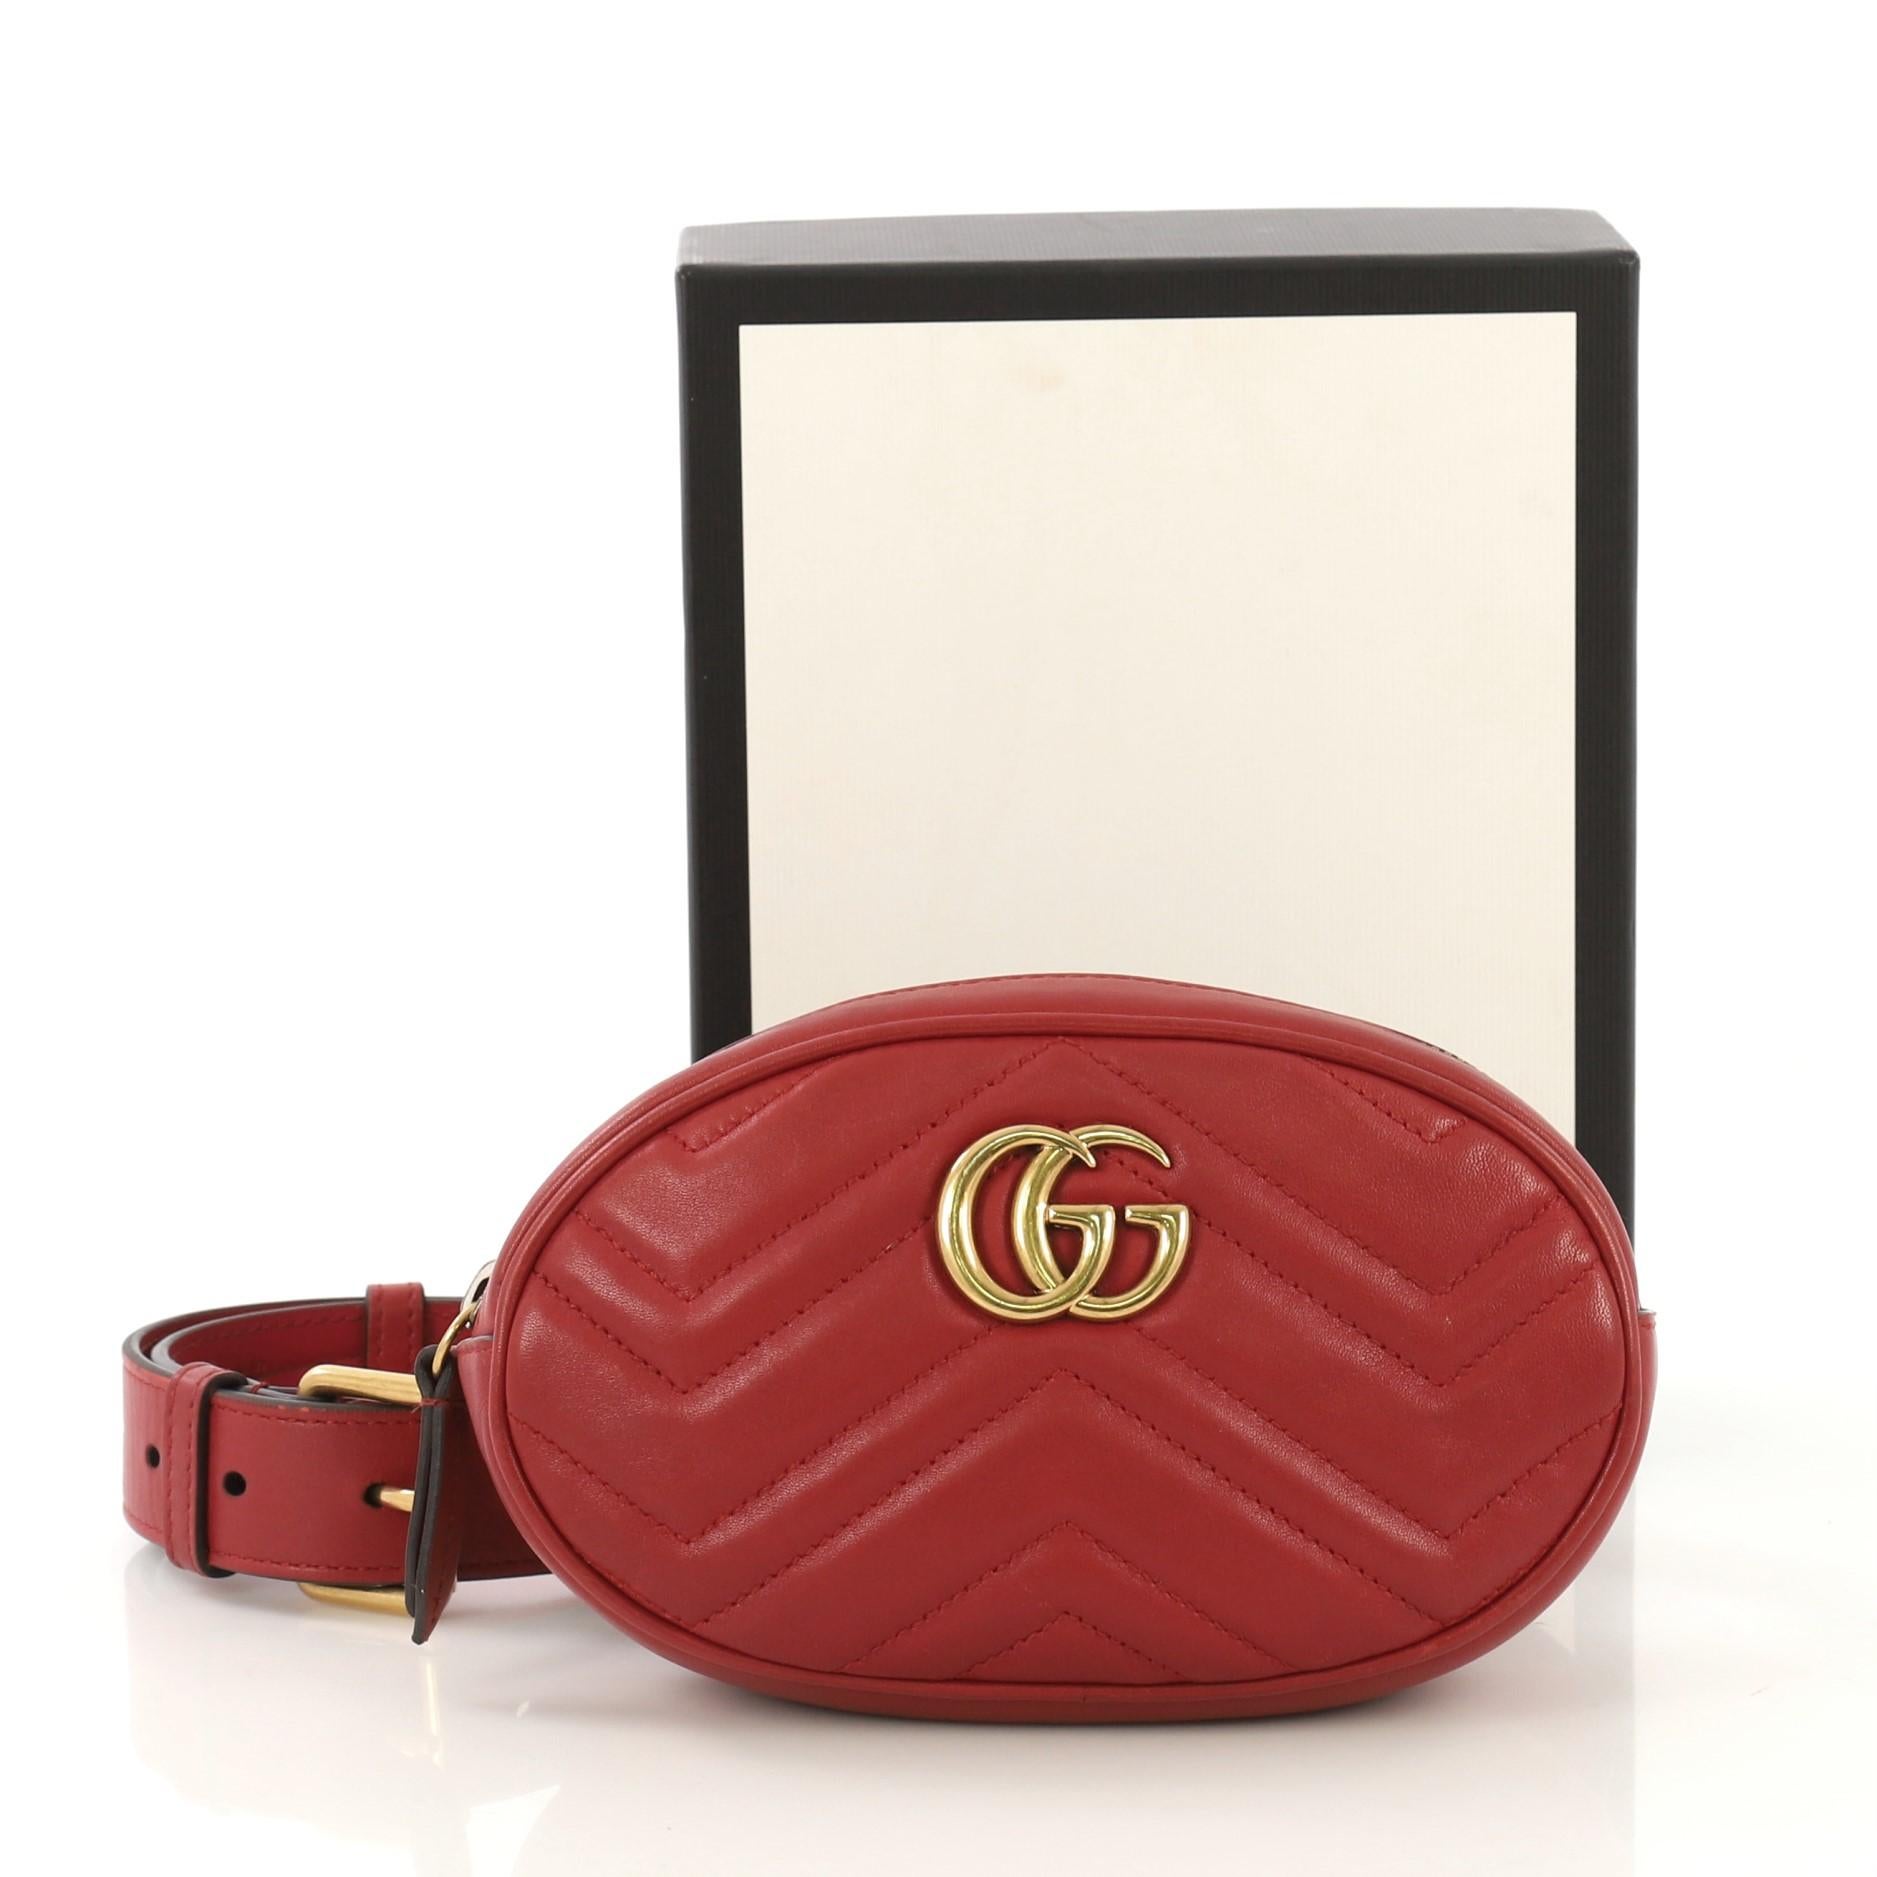 This Gucci GG Marmont Belt Bag Matelasse Leather, crafted in red matelasse leather, features adjustable belt strap, GG logo at front and aged gold-tone hardware. Its zip closure opens to a nude microfiber interior with slip pocket. 

Estimated